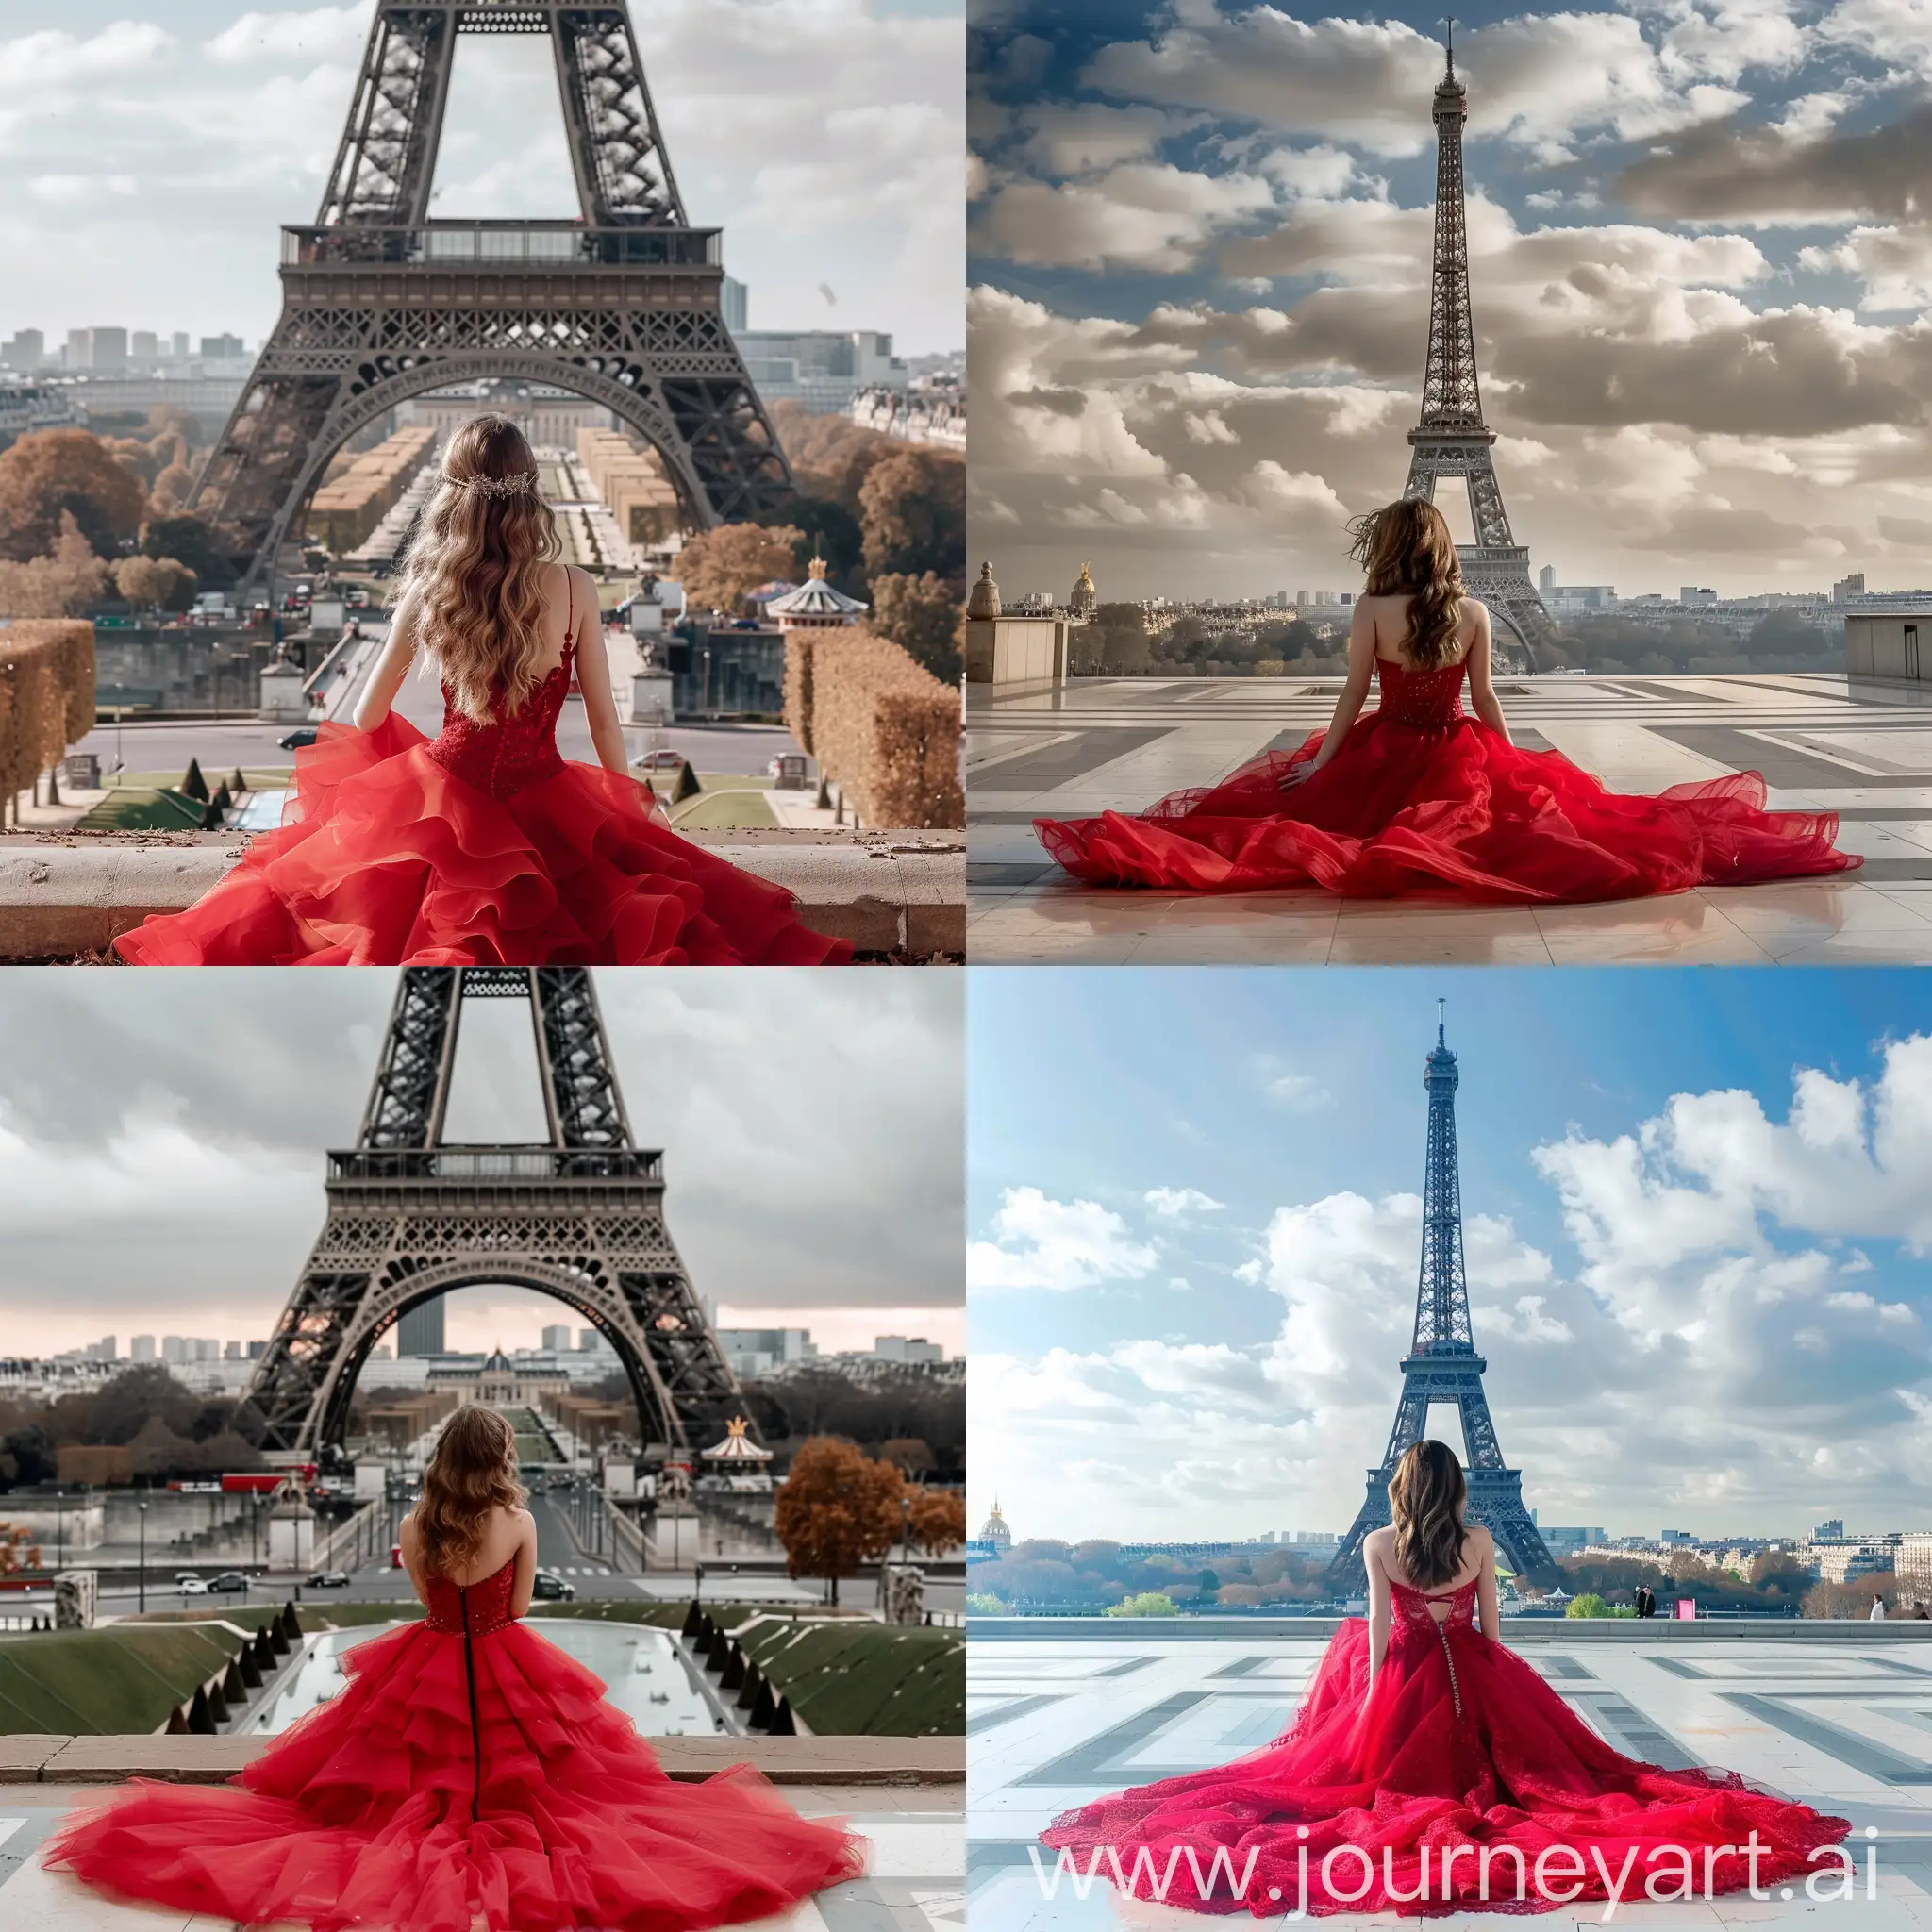 Sally-in-Red-Wedding-Dress-at-the-Eiffel-Tower